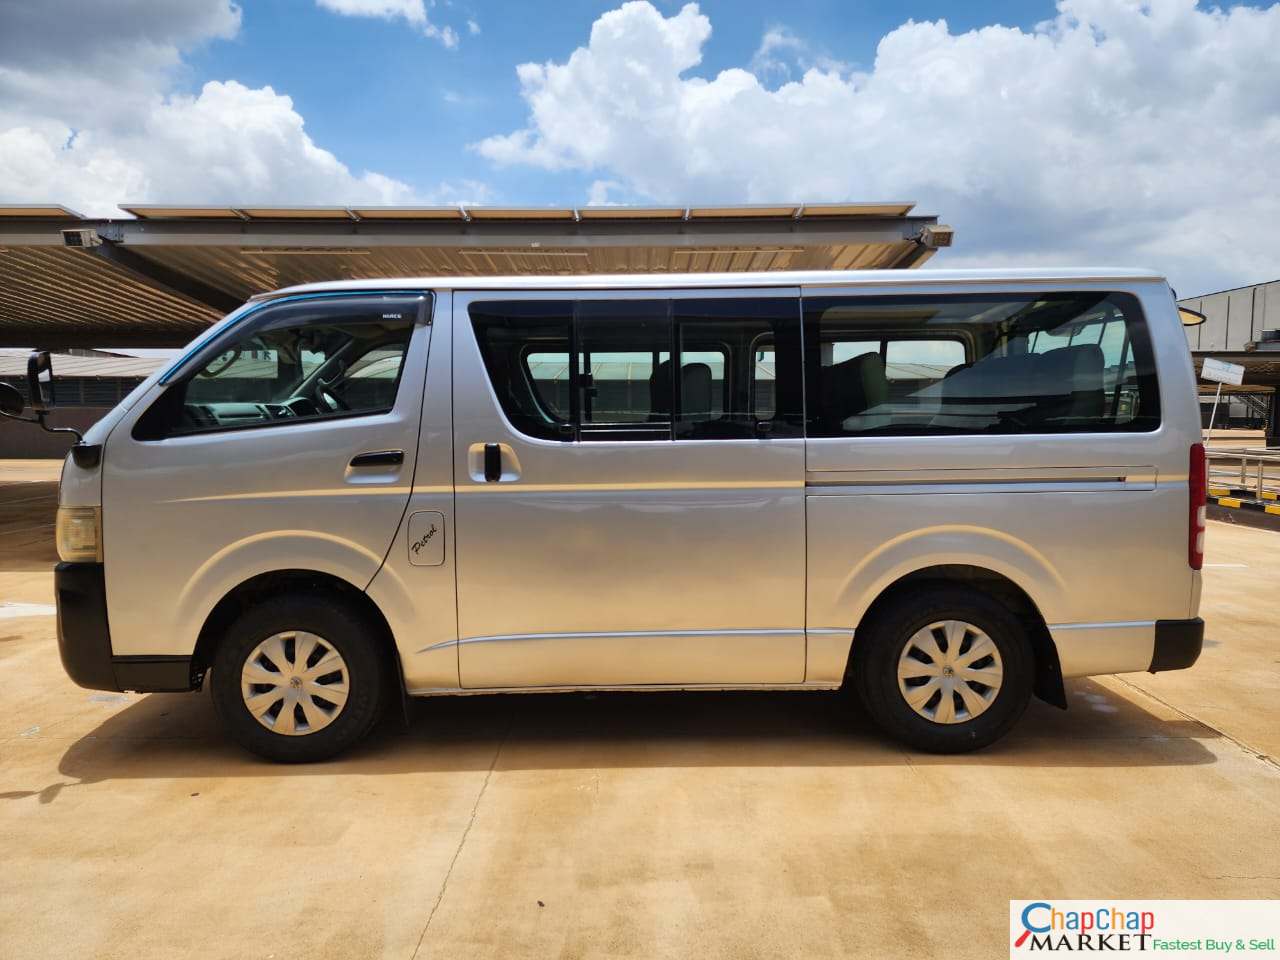 Cars Cars For Sale/Vehicles-Toyota HIACE 7L QUICK SALE Private You Pay 40% DEPOSIT TRADE IN OK EXCLUSIVE 9